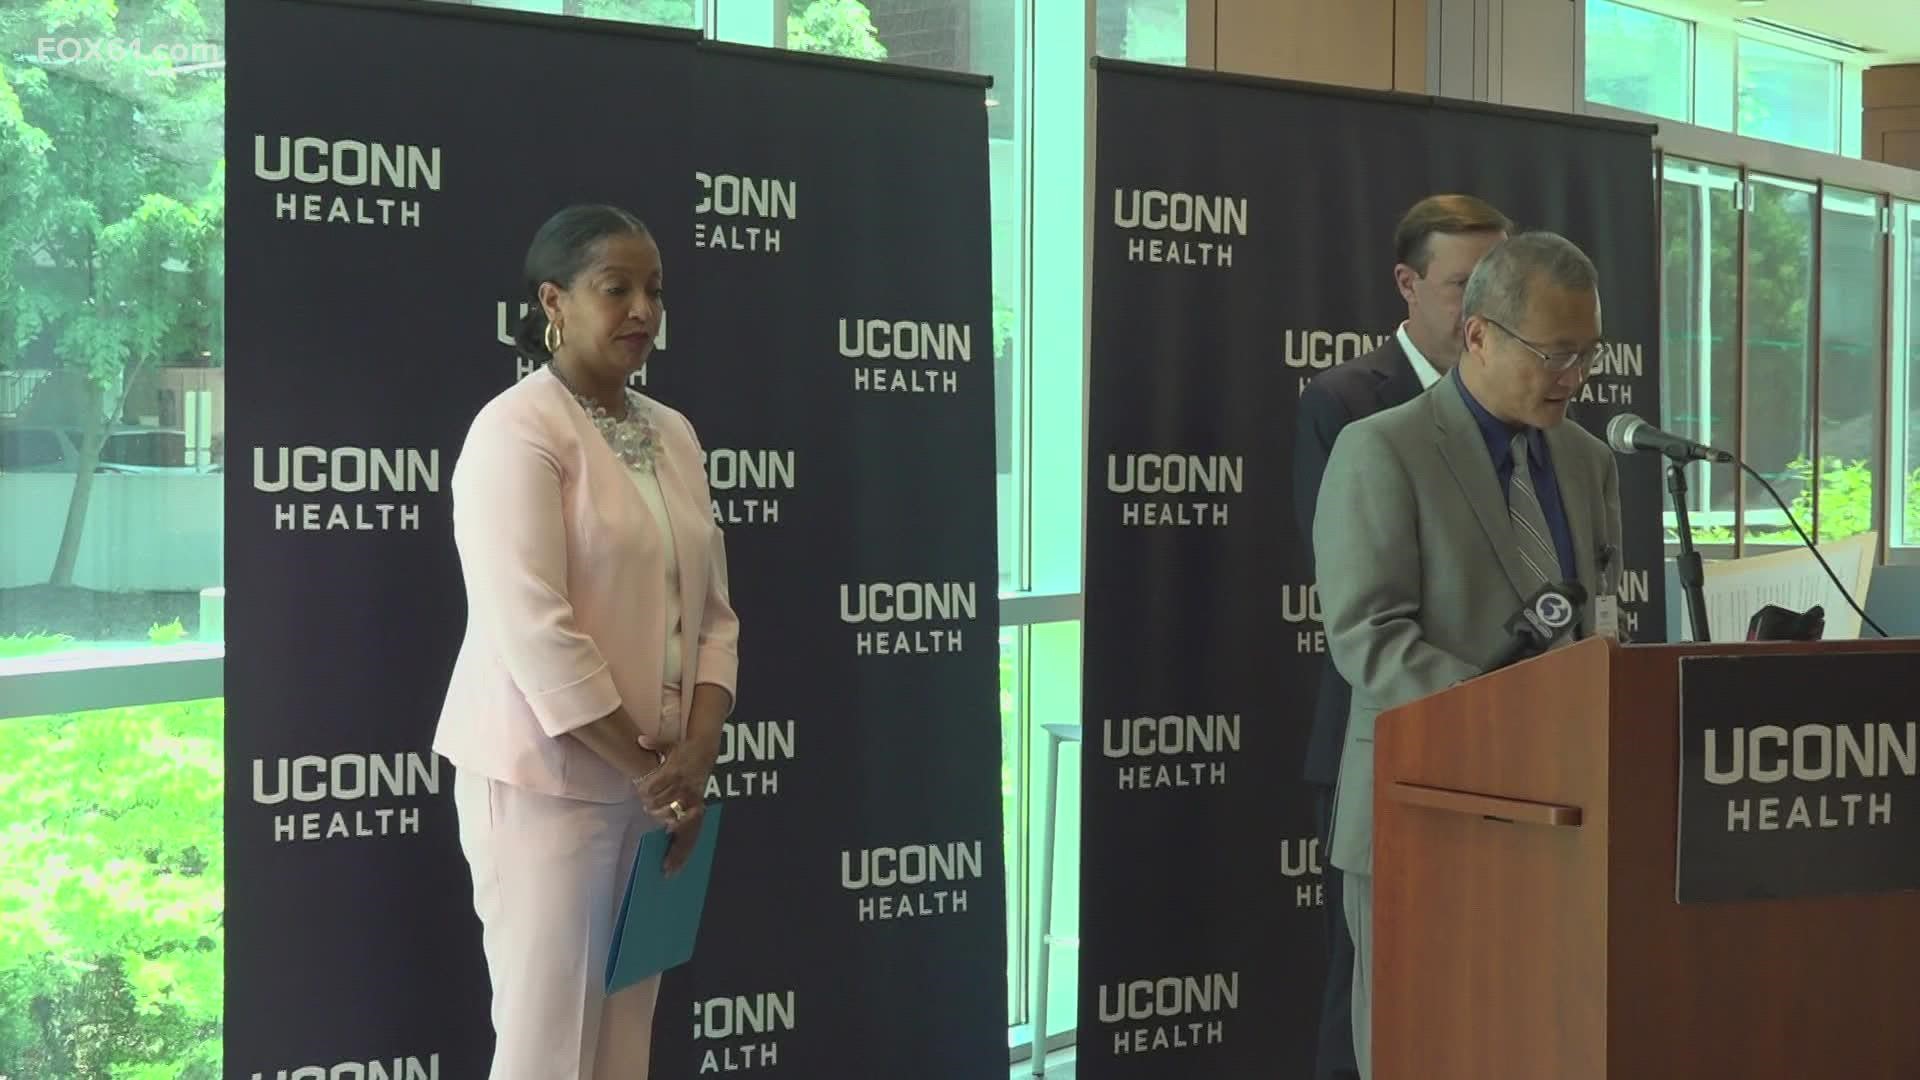 Topics like breastfeeding support were also discussed at a roundtable event with state leaders and doctors at UConn Health.